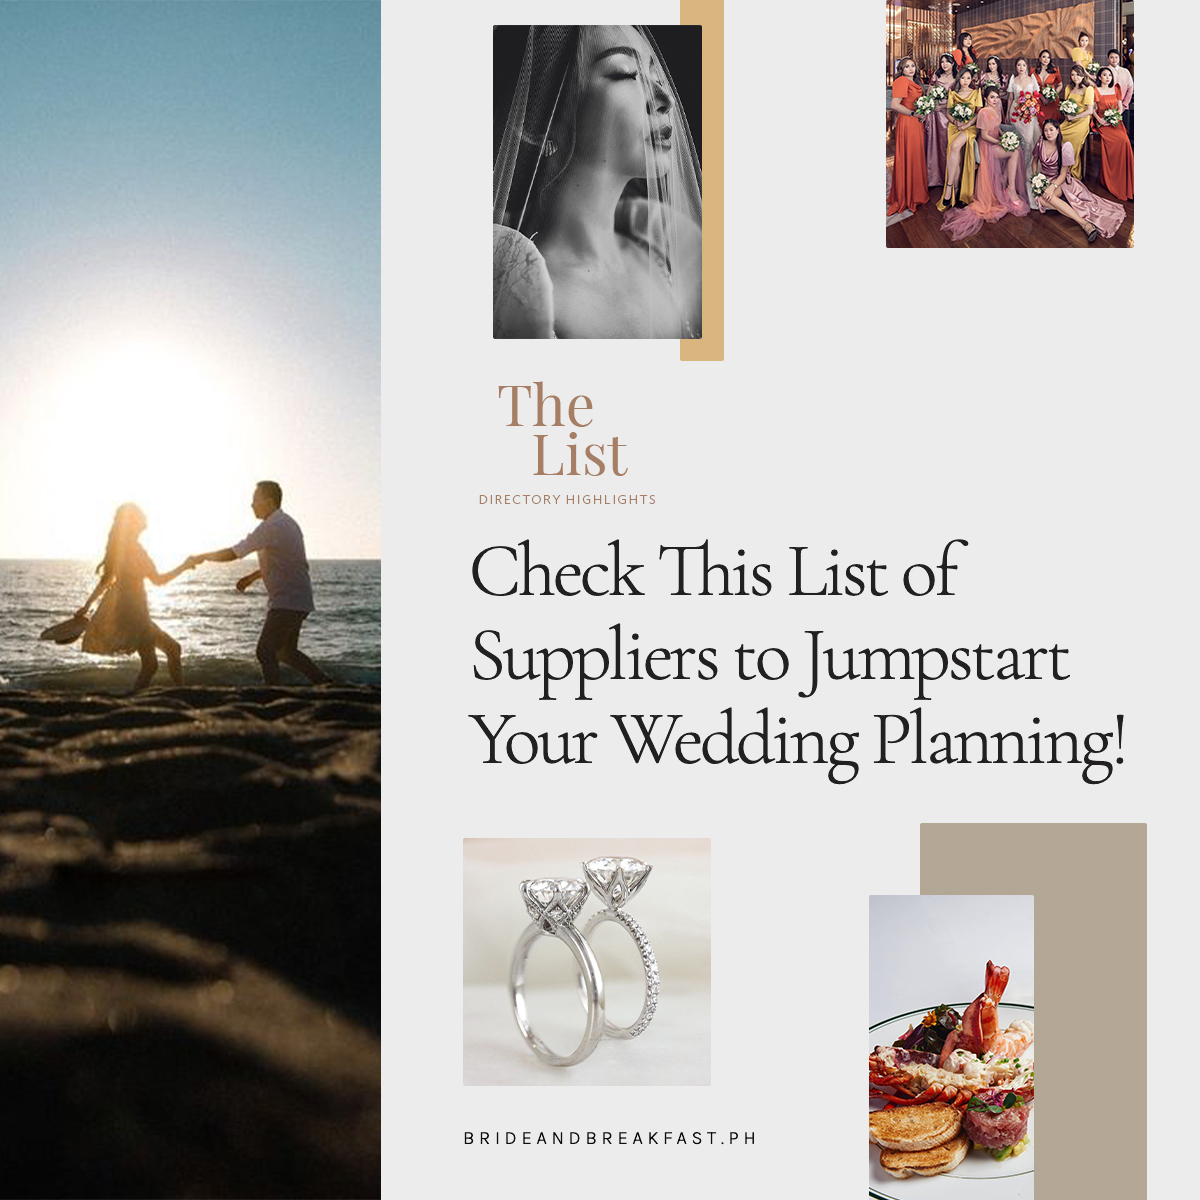 Check This List of Suppliers to Jumpstart Your Wedding Planning!